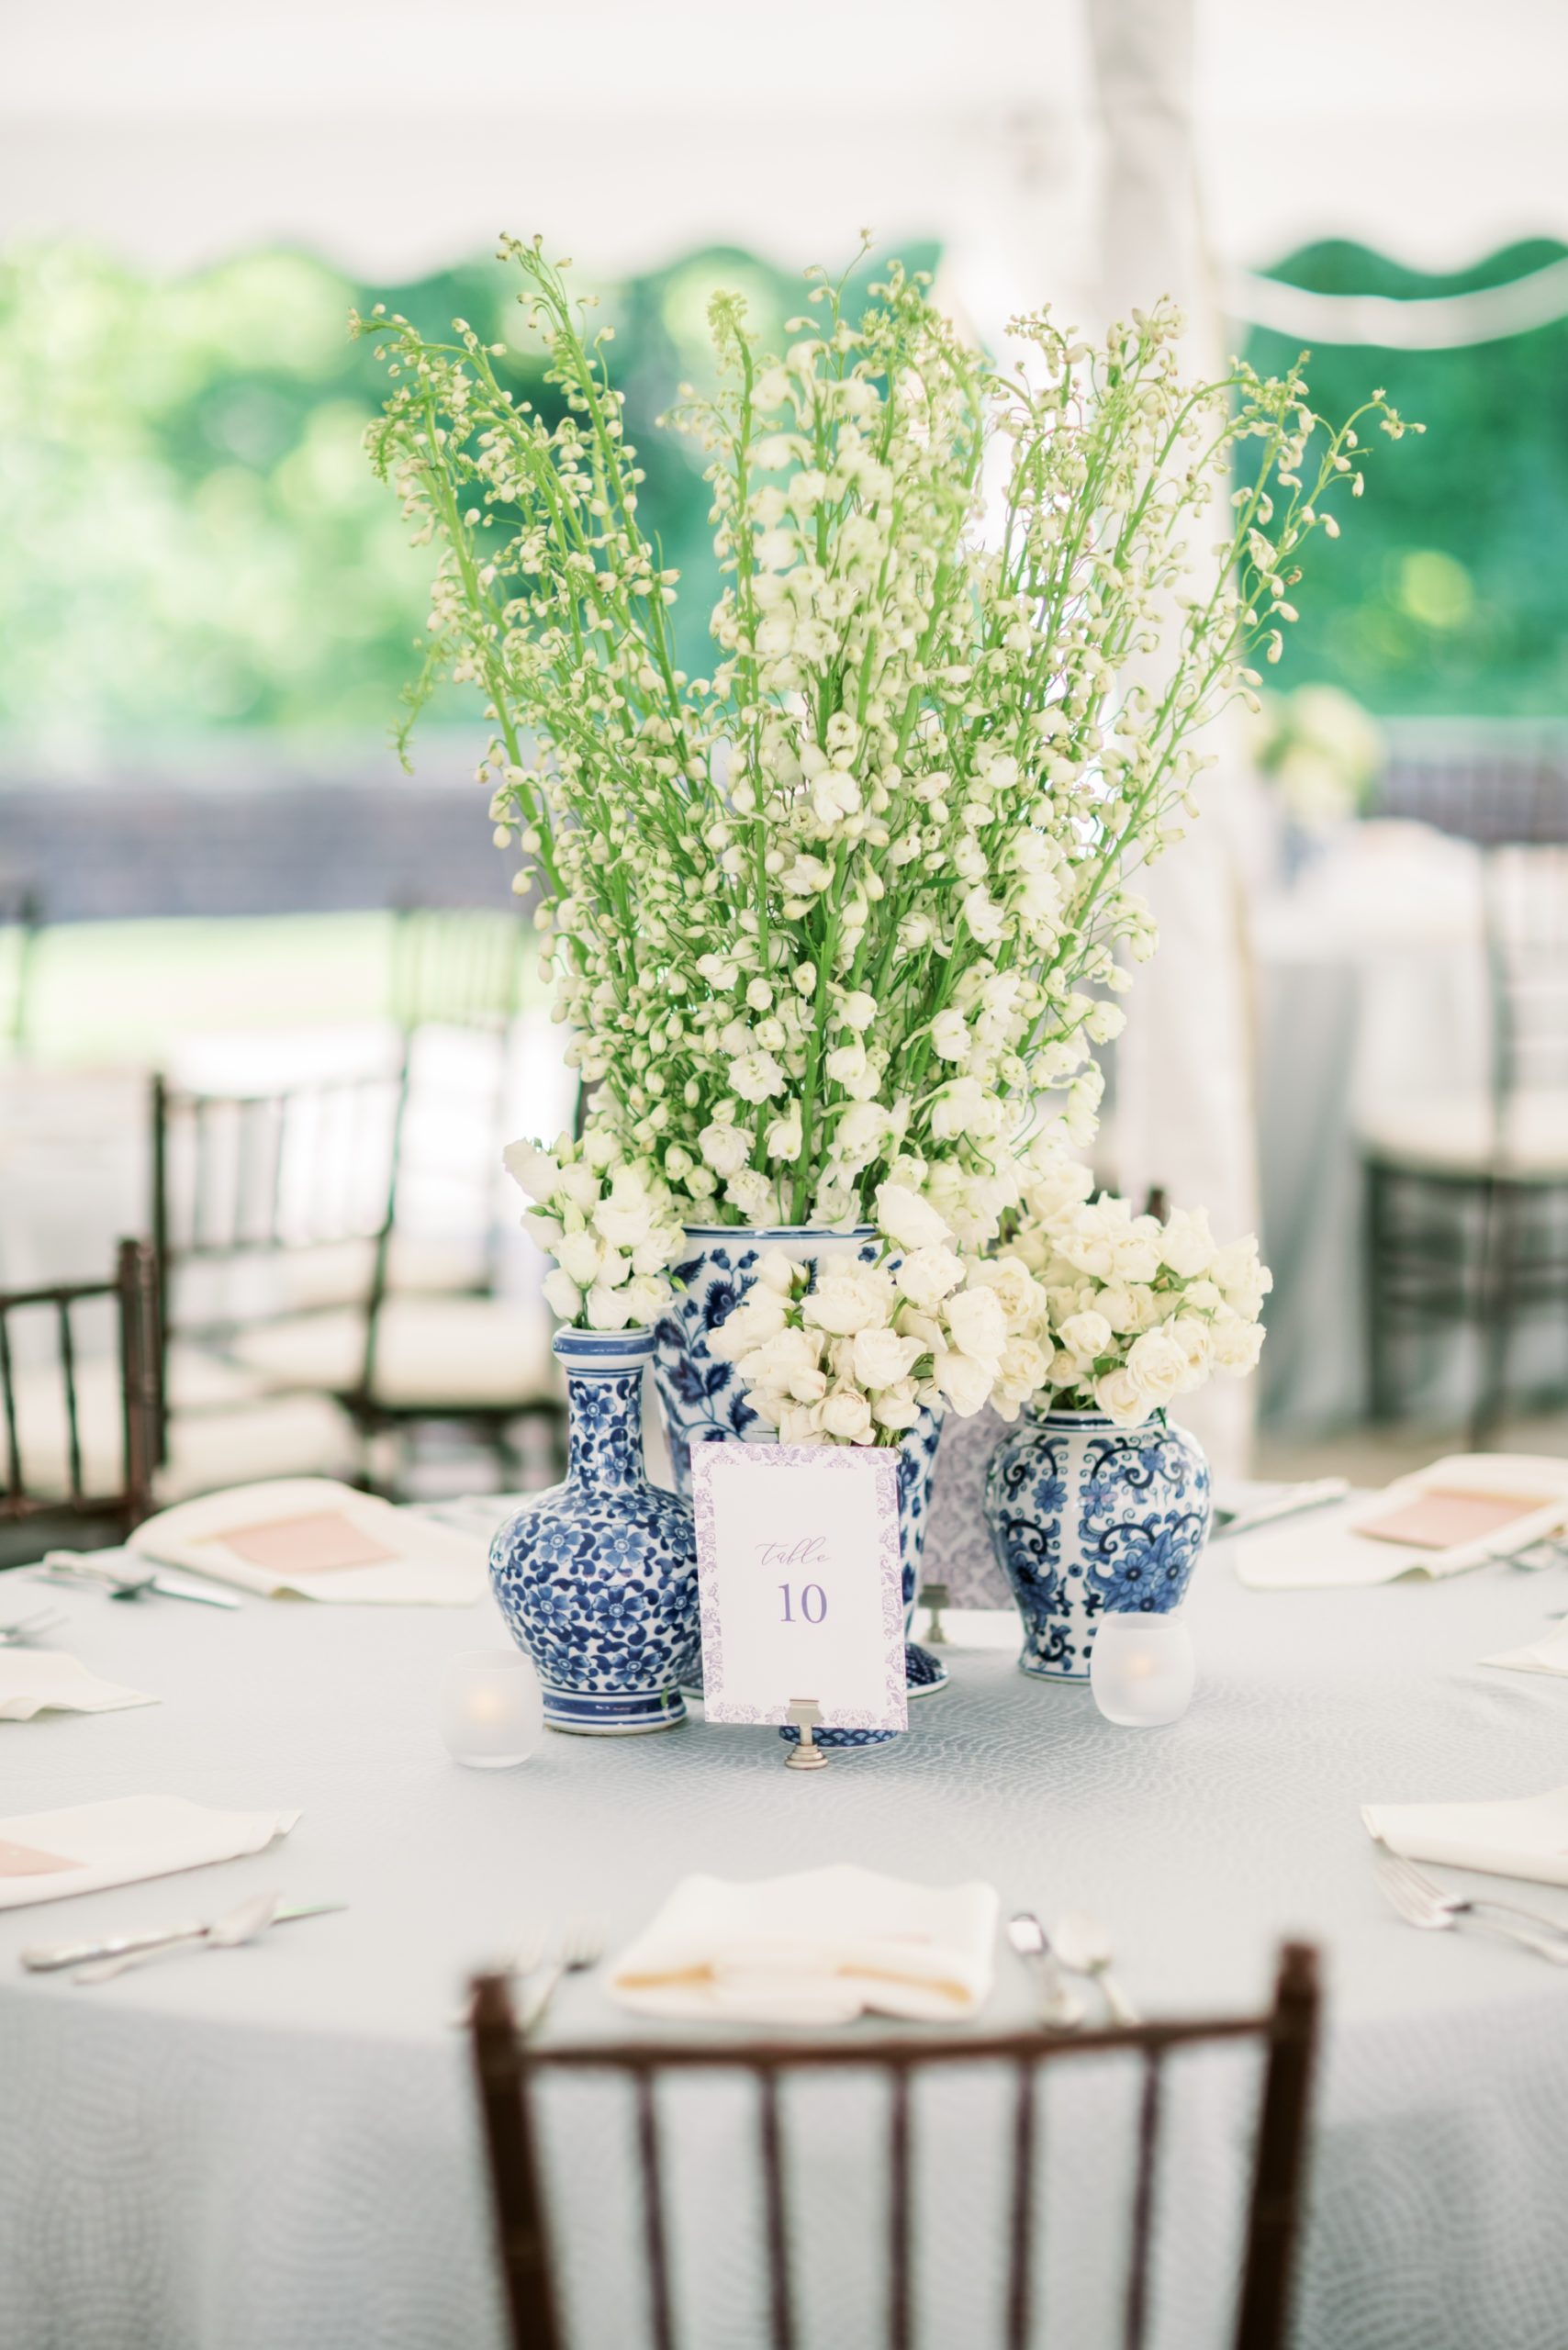 Roots Floral provided stunning and elegant centerpieces